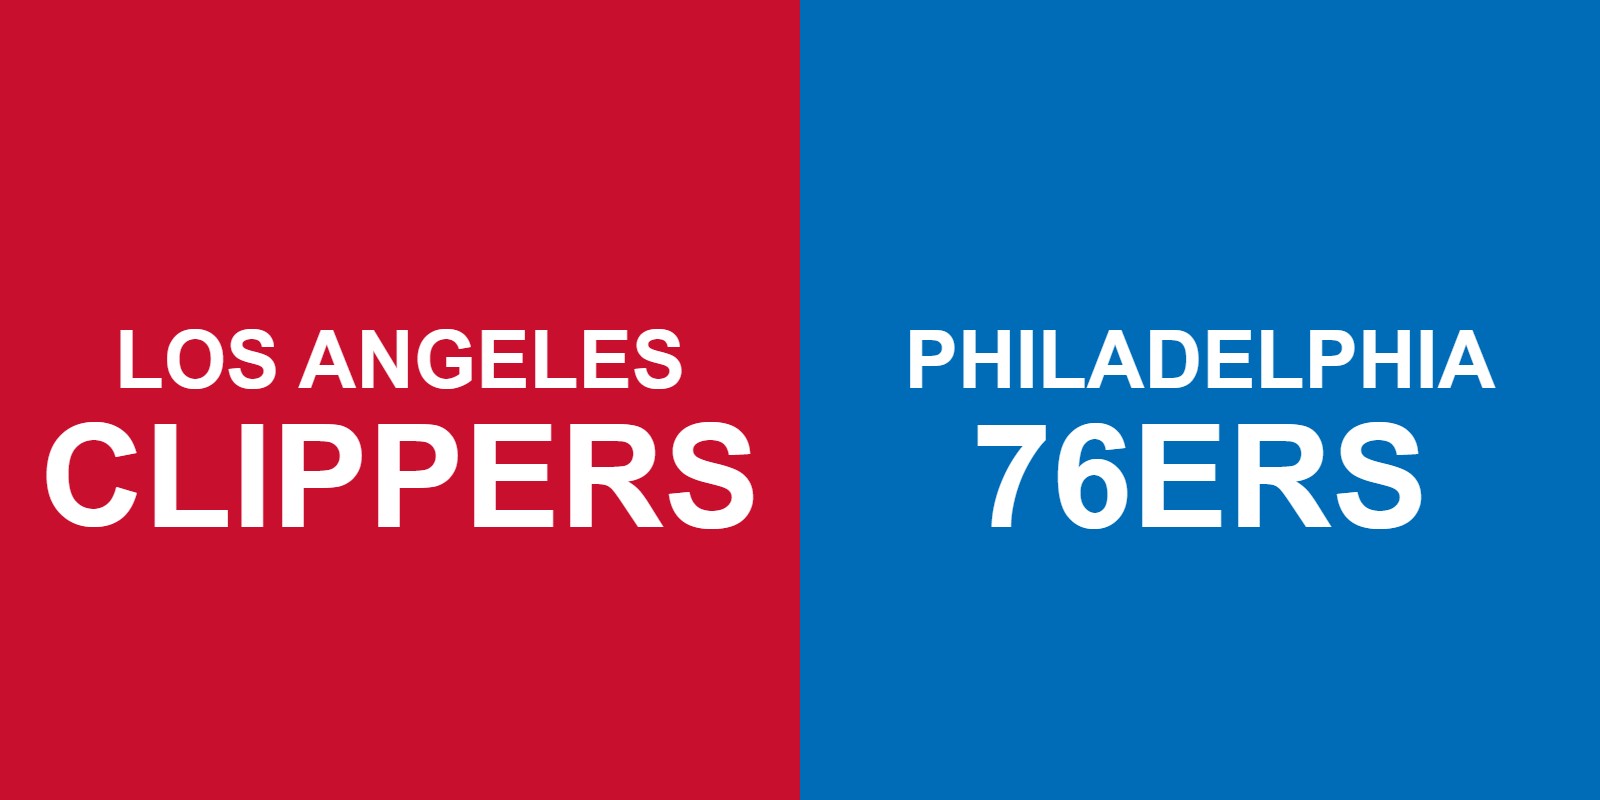 Clippers vs 76ers